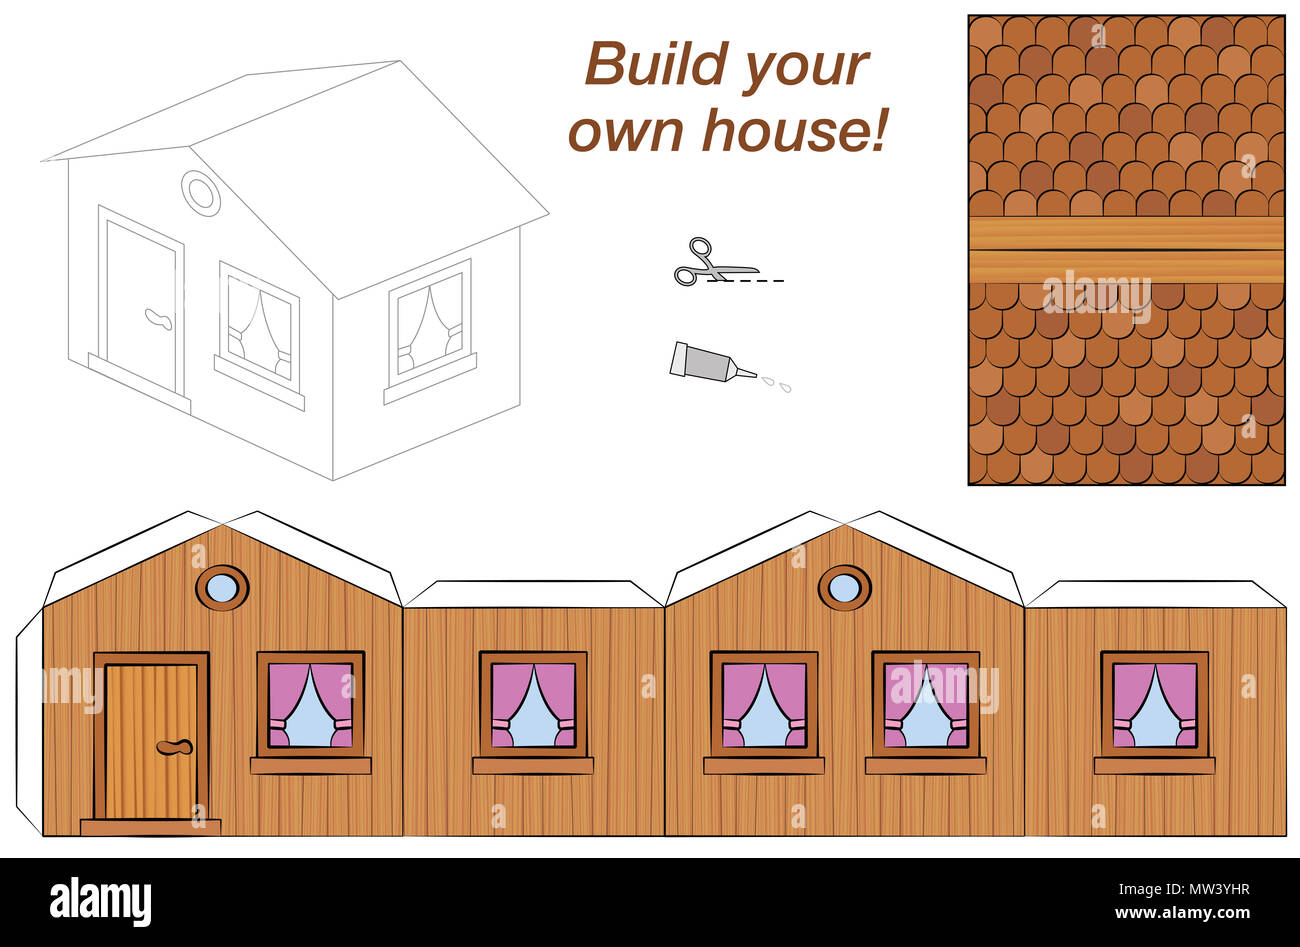 House template - sweet pink comic cottage - cut out, fold and glue it - illustration on white background. Stock Photo